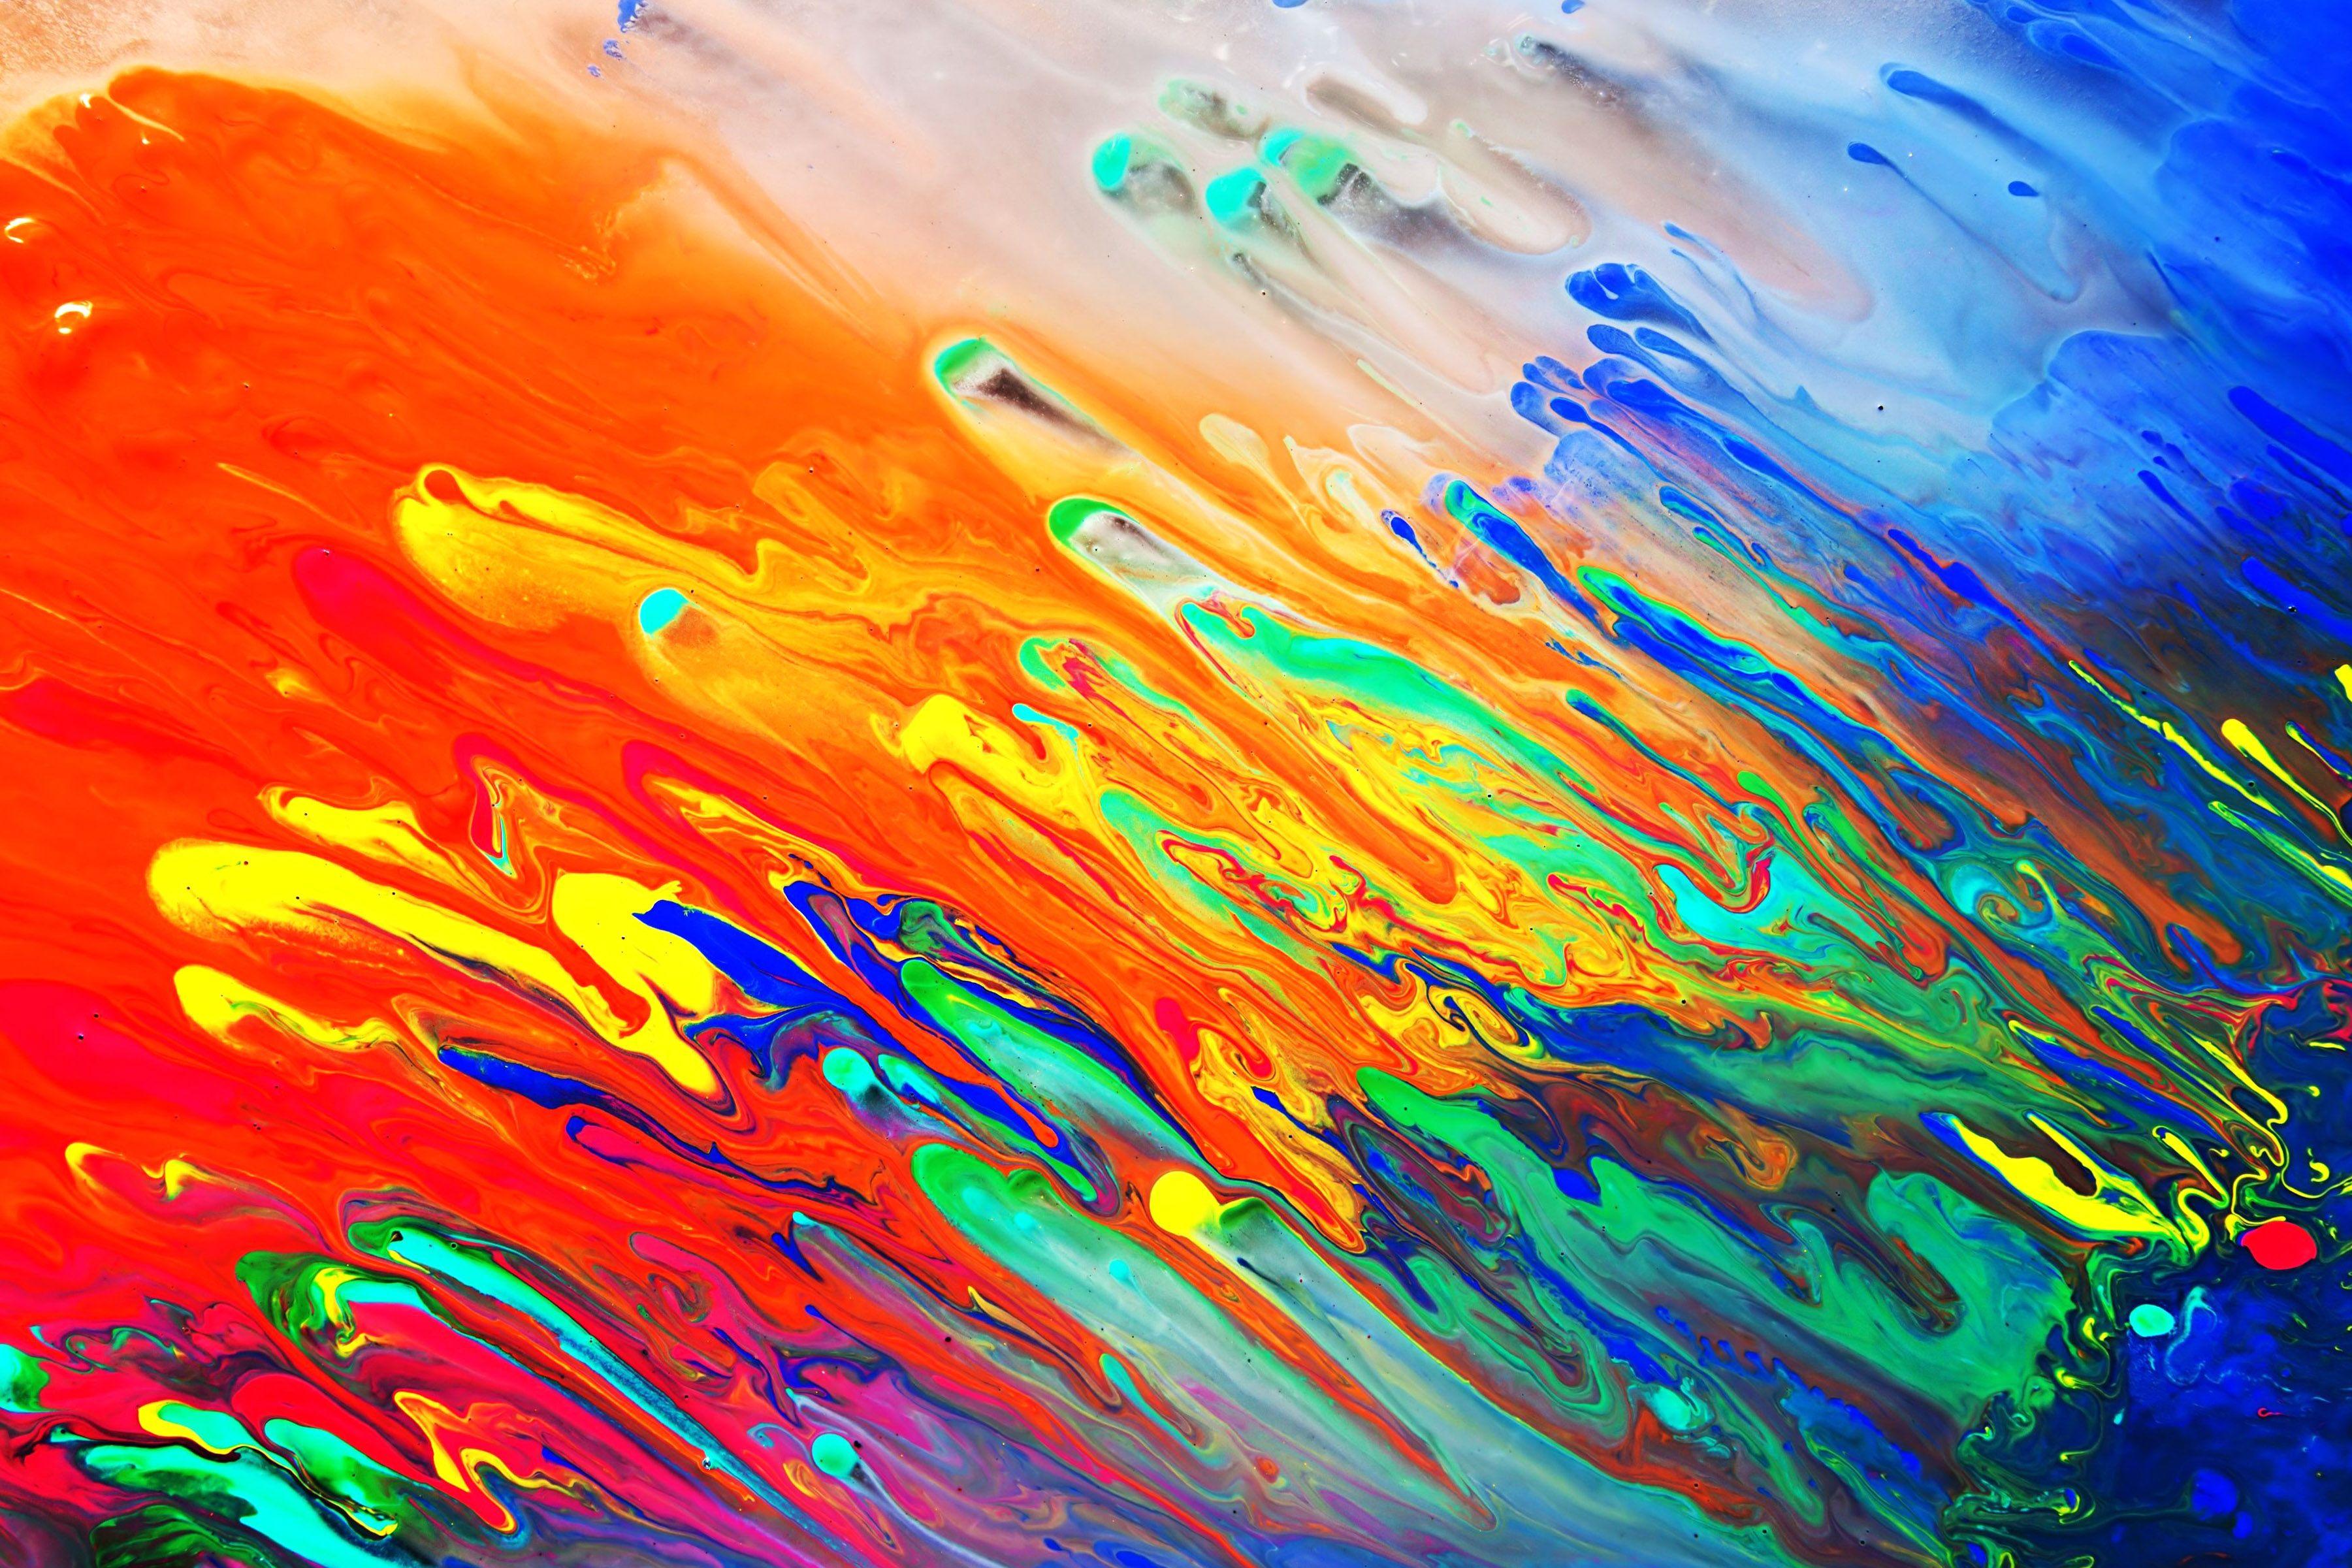 Colorful Abstract Art Wallpapers